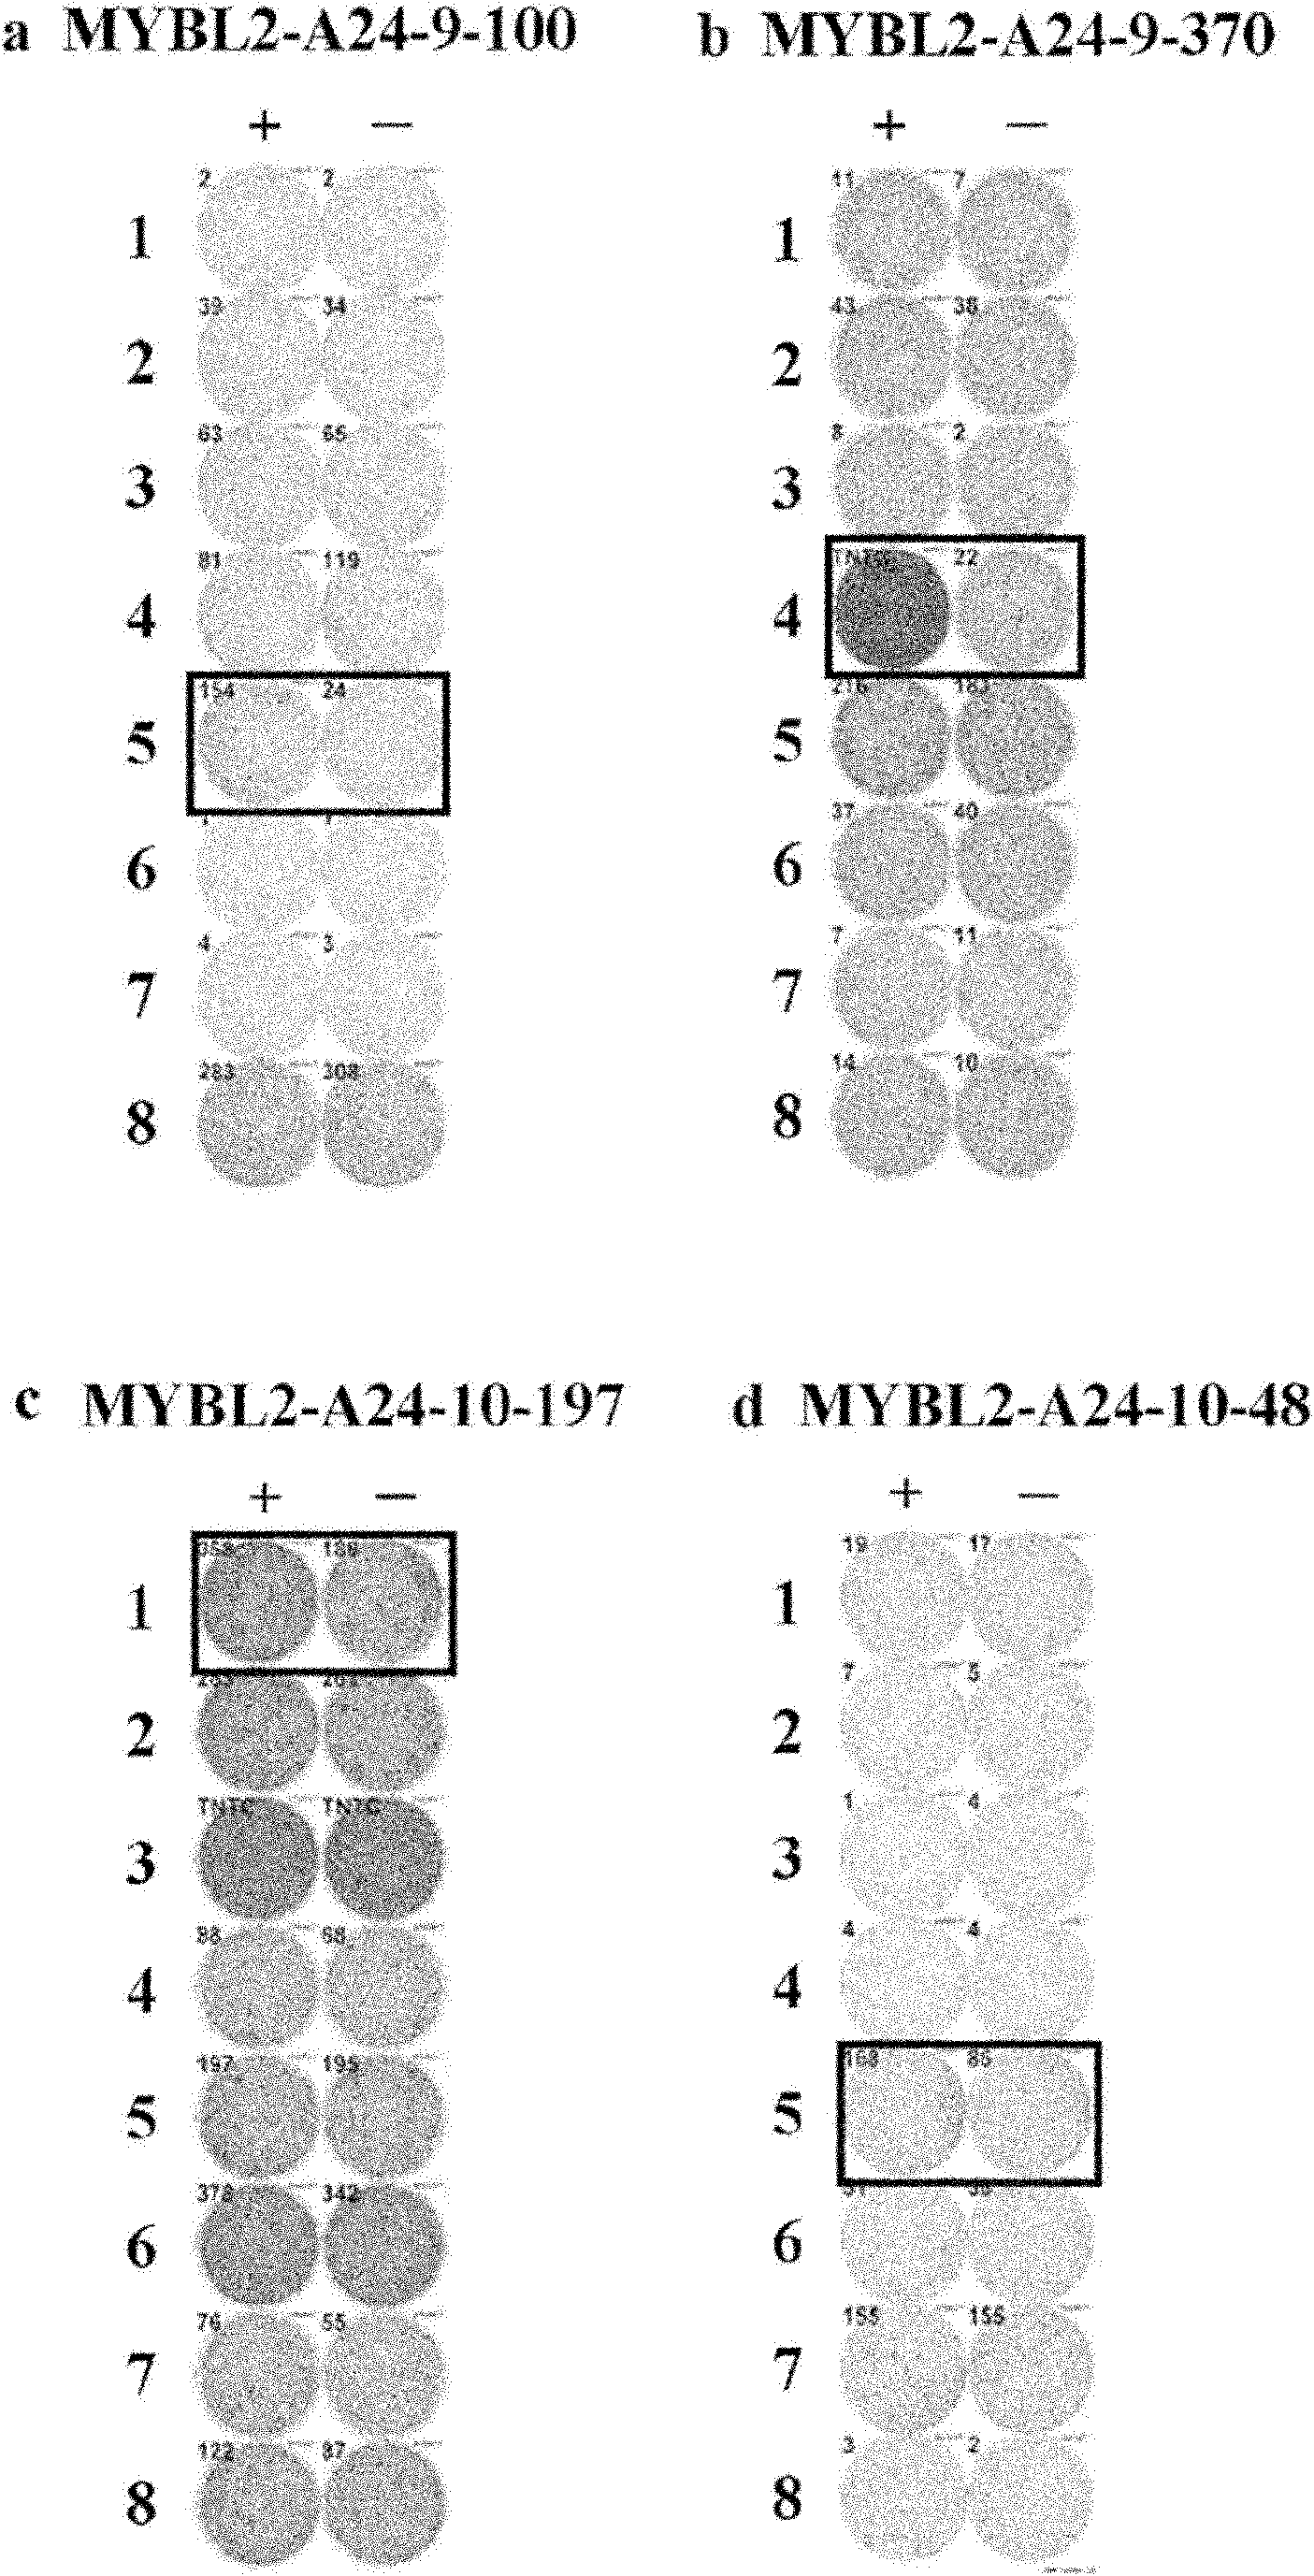 MYBL2 epitope peptides and vaccines containing the same